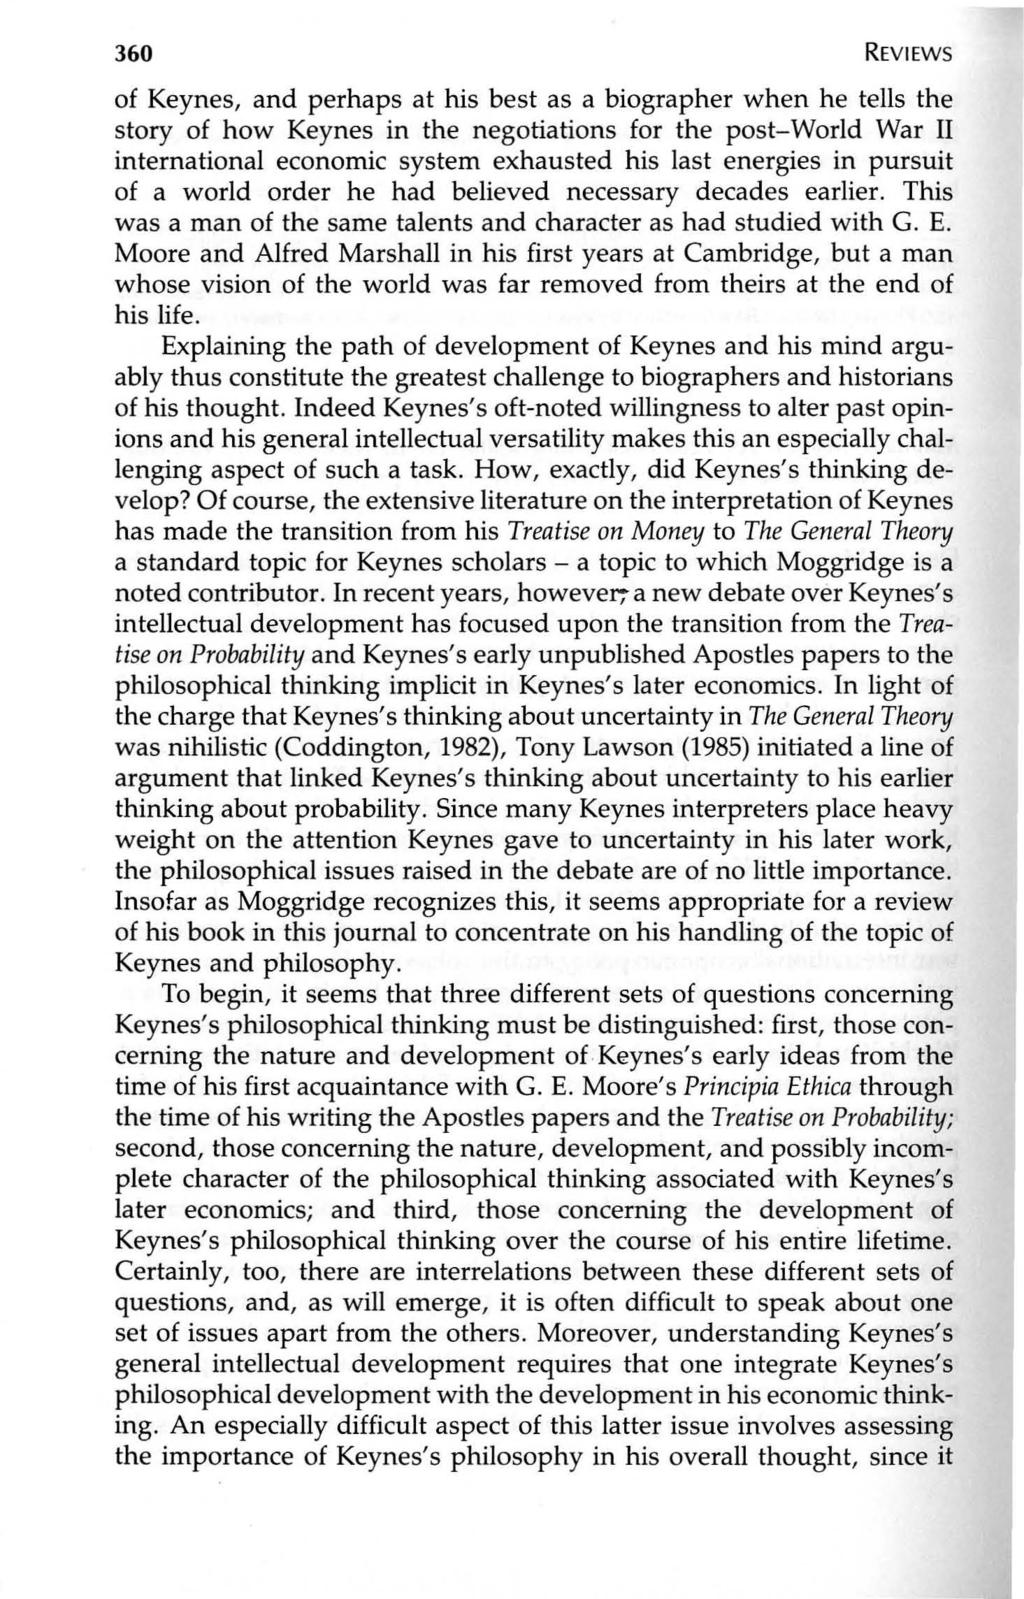 360 REVIEWS of Keynes, and perhaps at his best as a biographer when he tells the story of how Keynes in the negotiations for the post-world War II international economic system exhausted his last